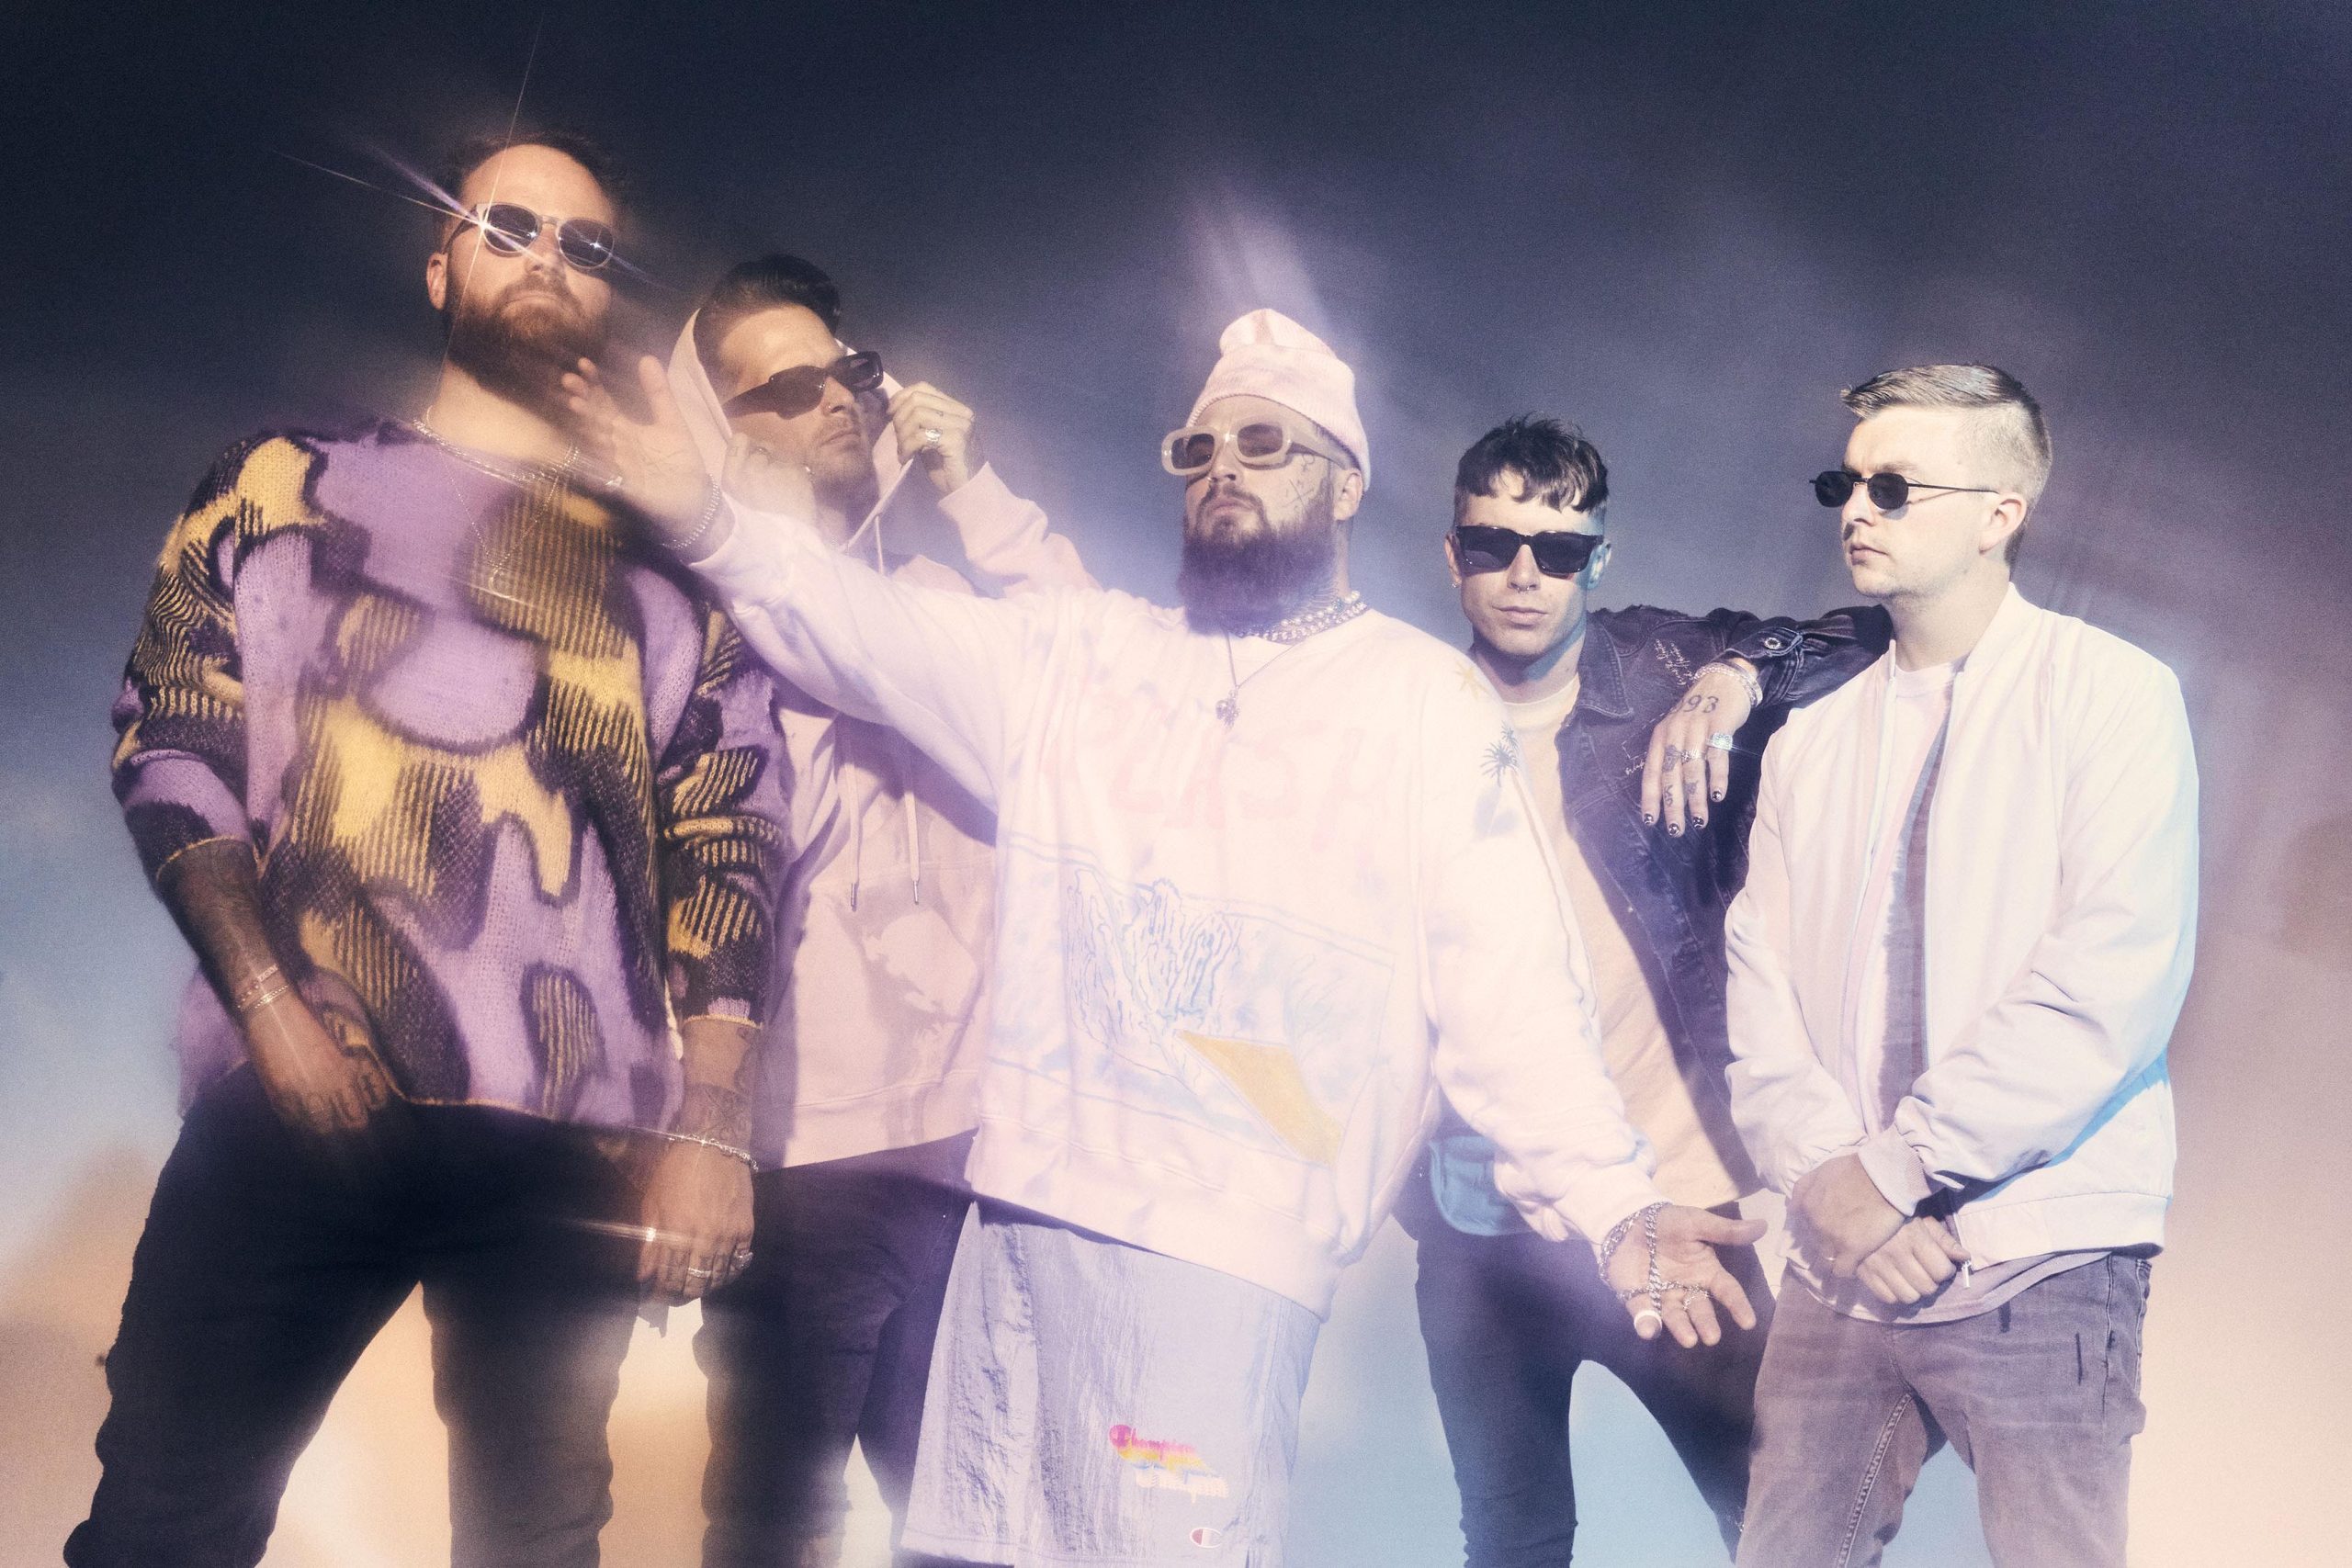 MUSIC NEWS: Highly Suspect Release Two New Tracks ‘Ice Cold’ & ‘New California’